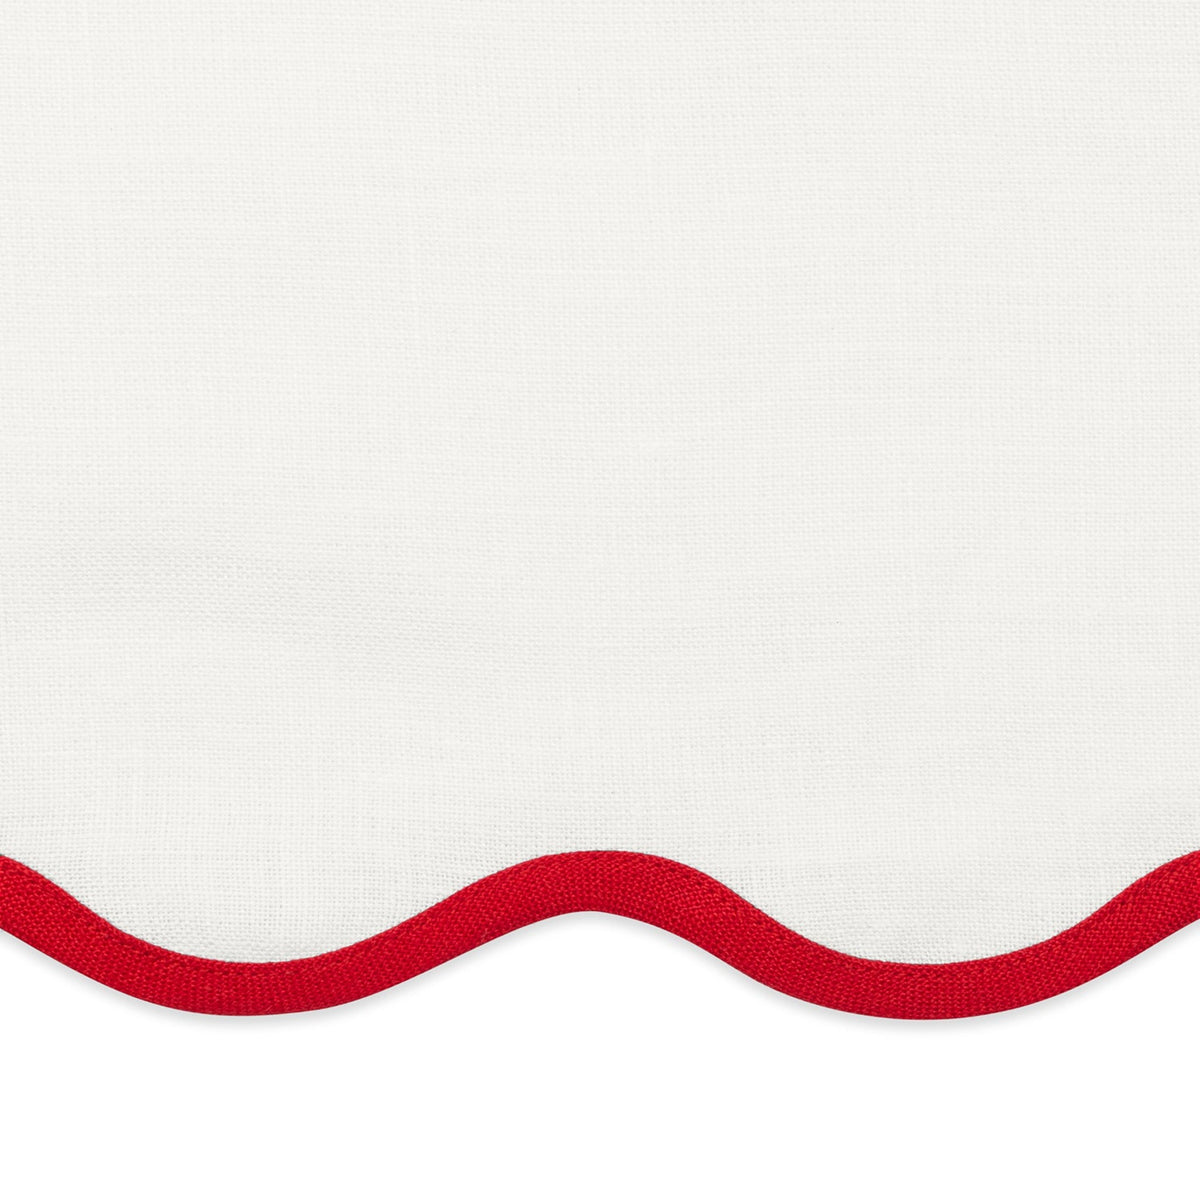 Swatch Sample of Matouk Scallop Edge Table Linens in Scarlet Color